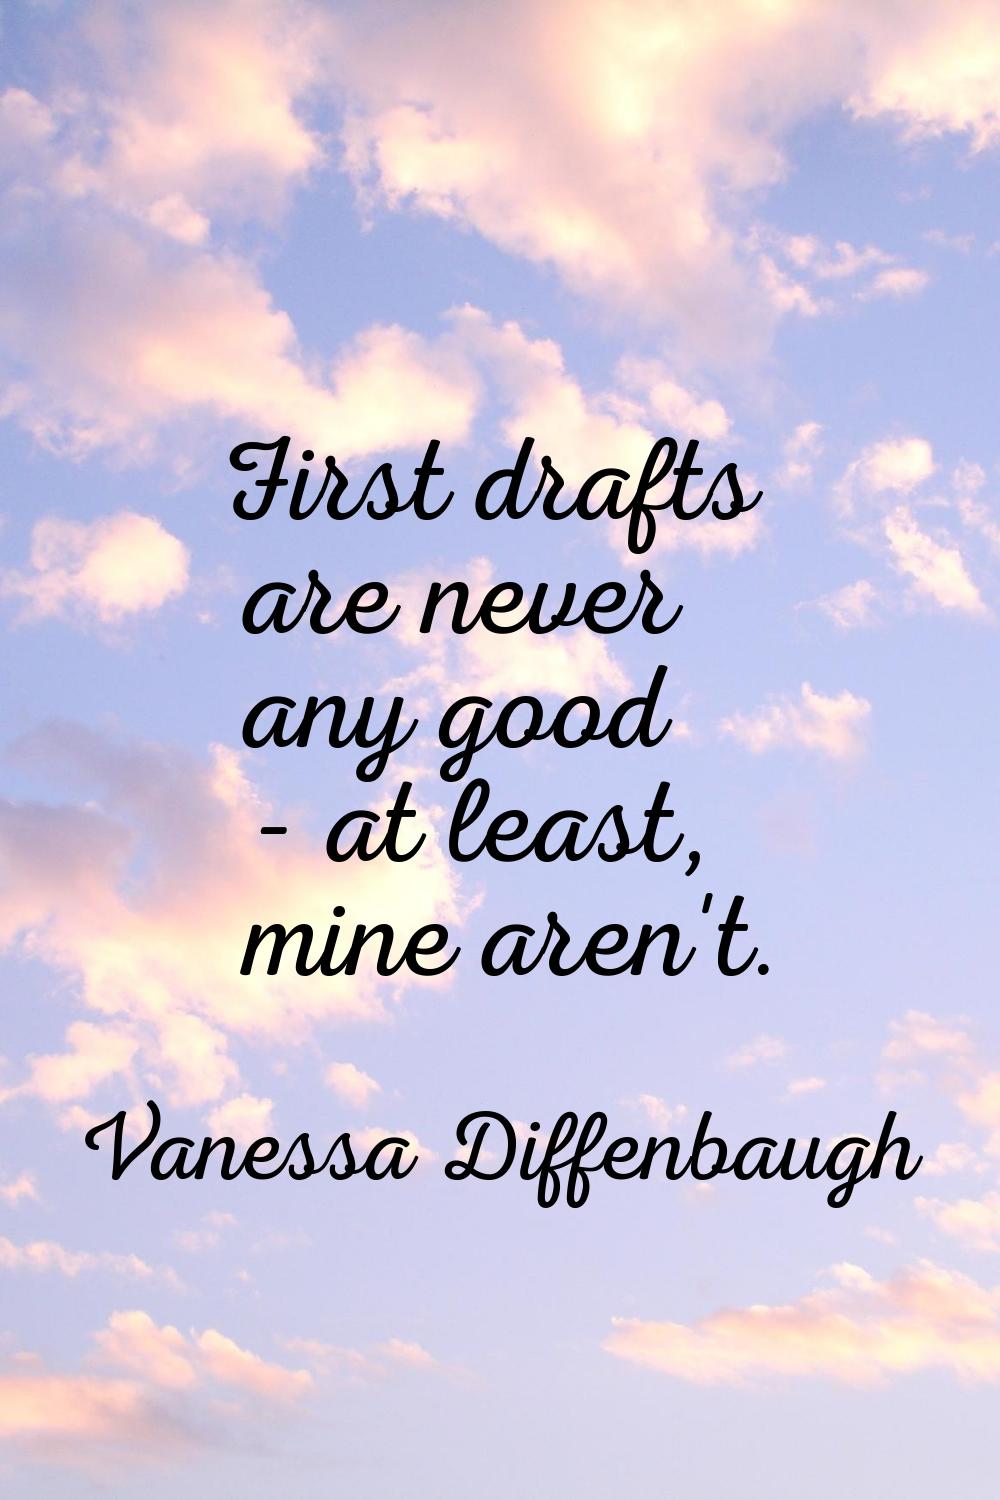 First drafts are never any good - at least, mine aren't.